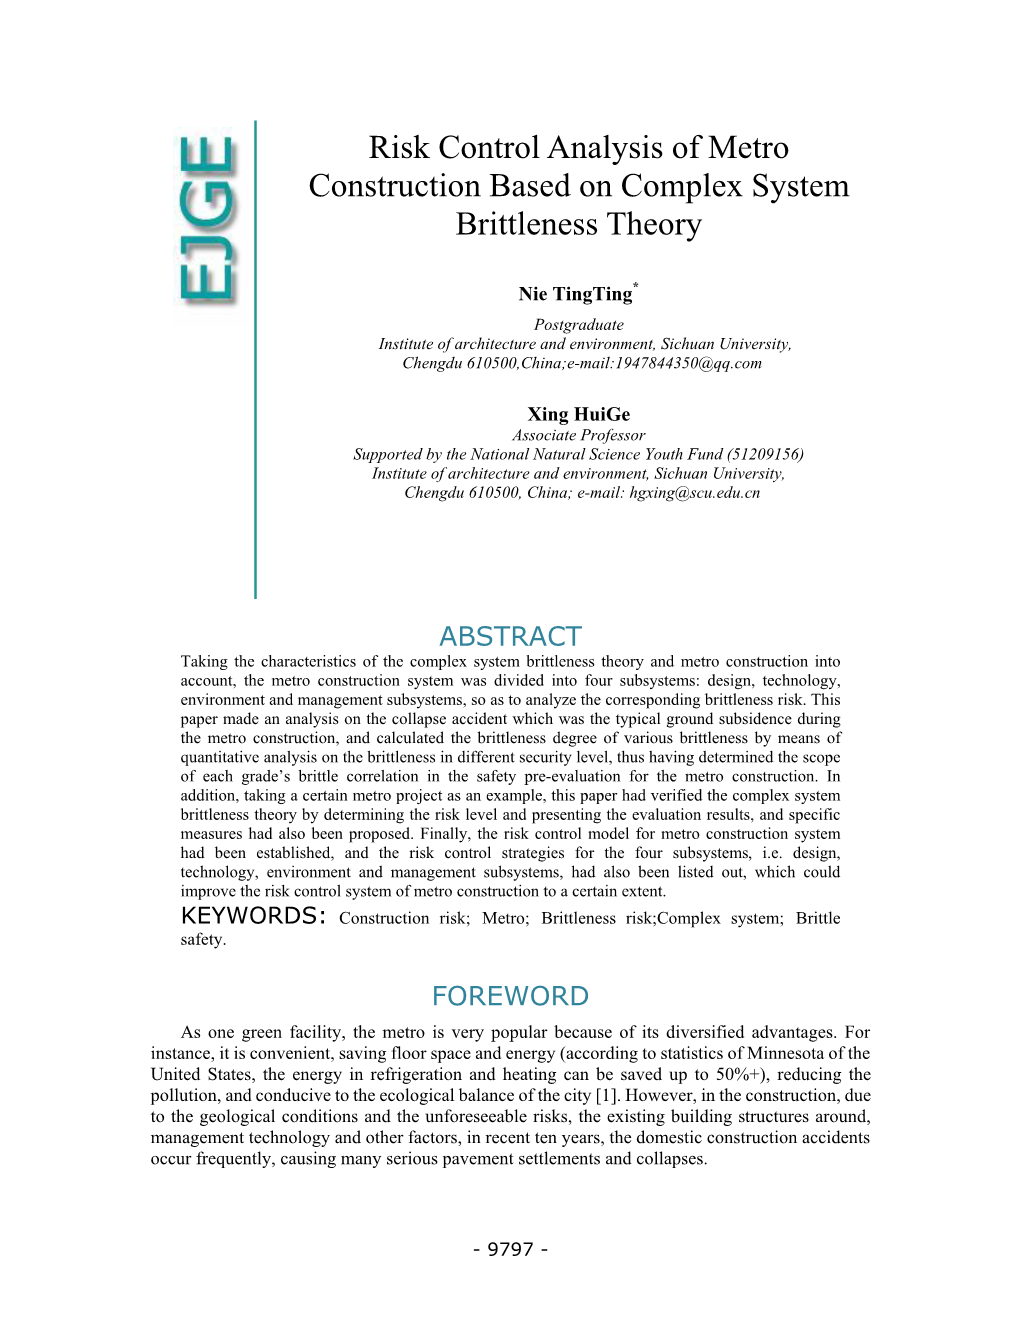 Risk Control Analysis of Metro Construction Based on Complex System Brittleness Theory